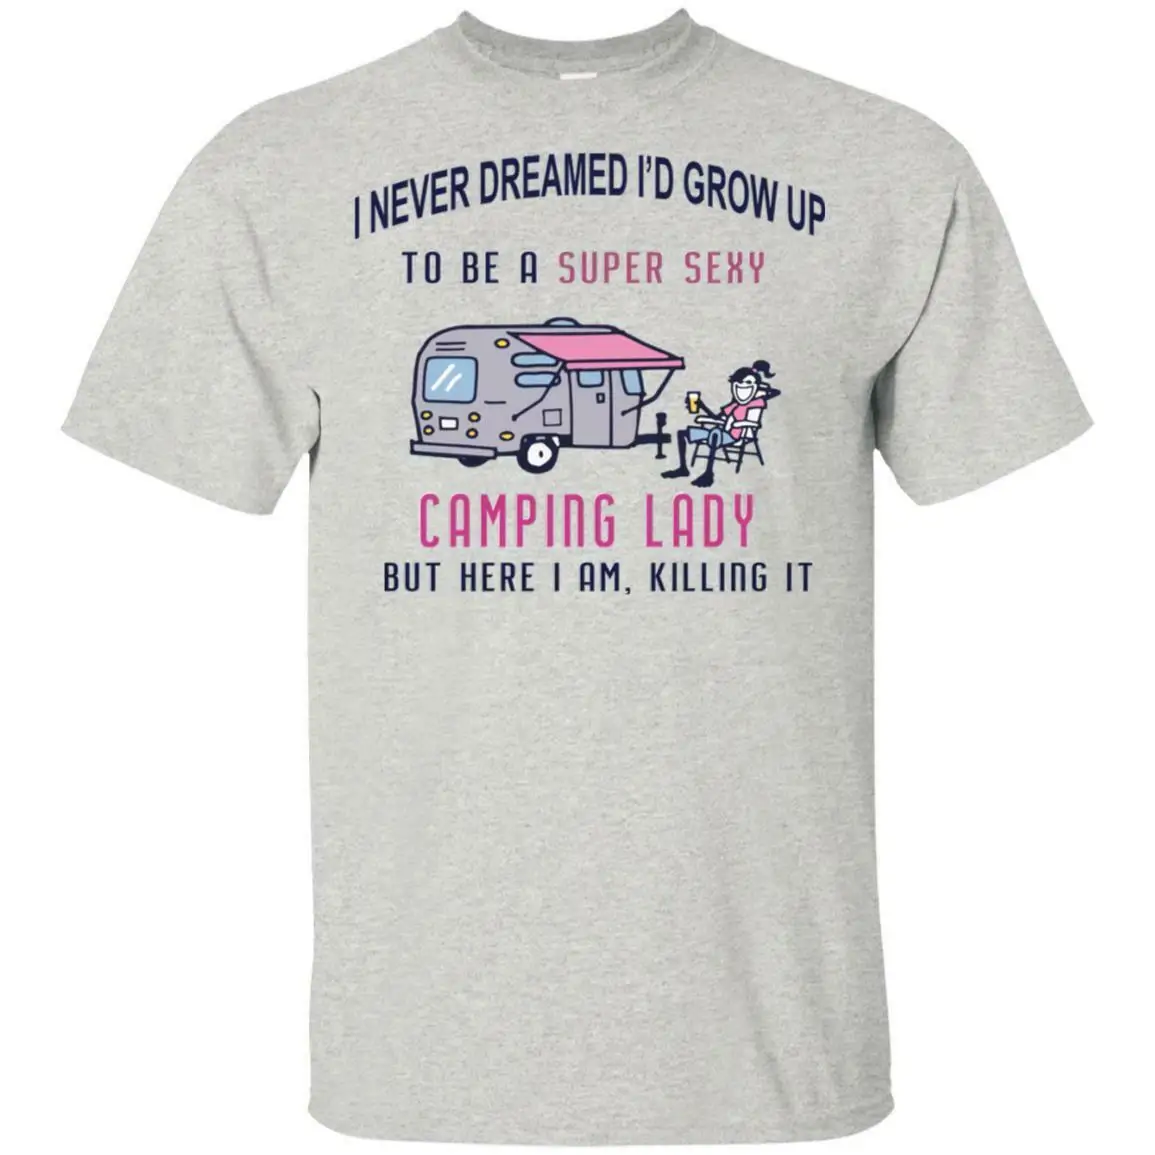 

I Never Dreamed I'd Grow Up To Be A Campings Lady But Here I Am Killing It Shirt Men's Funny T Shirts